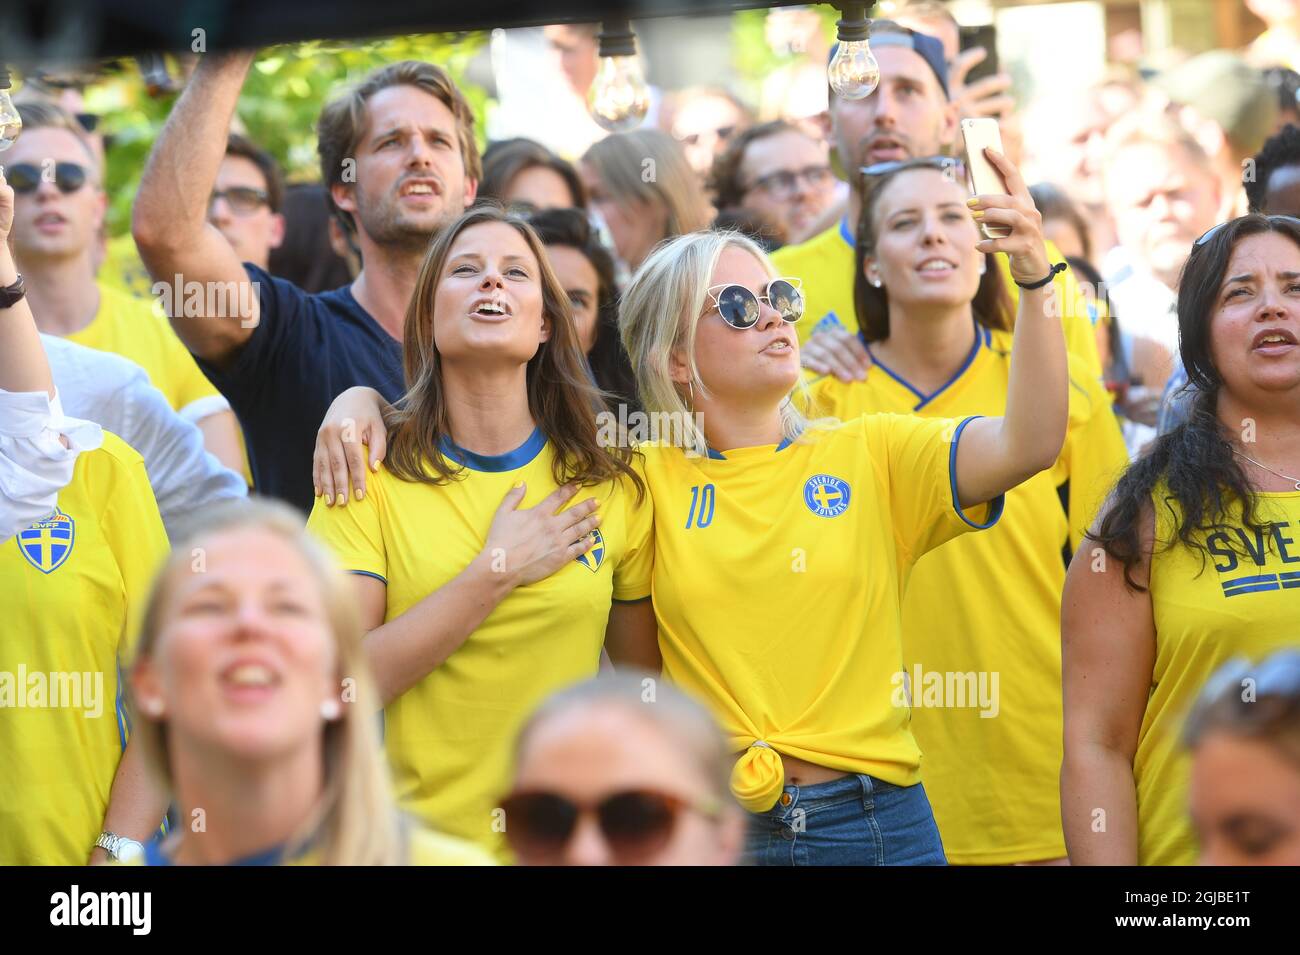 Swedish soccer fans take a selfie as they watch Sweden play against Mexico during the Russia 2018 World Cup Group F soccer match on a big screen outdoors at Norra Bantorget in central Stockholm, Sweden, on June 27, 2018. Photo: Fredrik Sandberg / TT / code 10080  Stock Photo